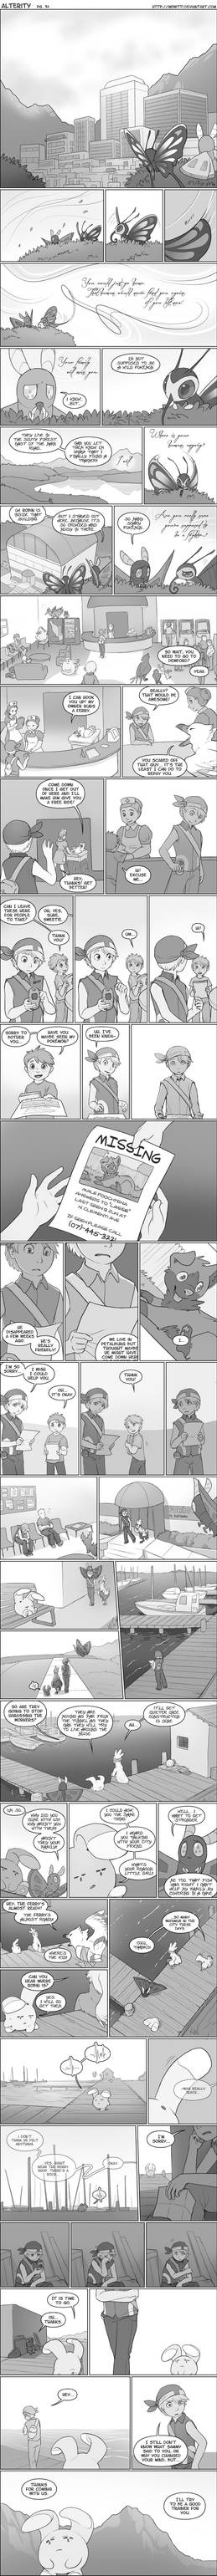 Alterity Page 34